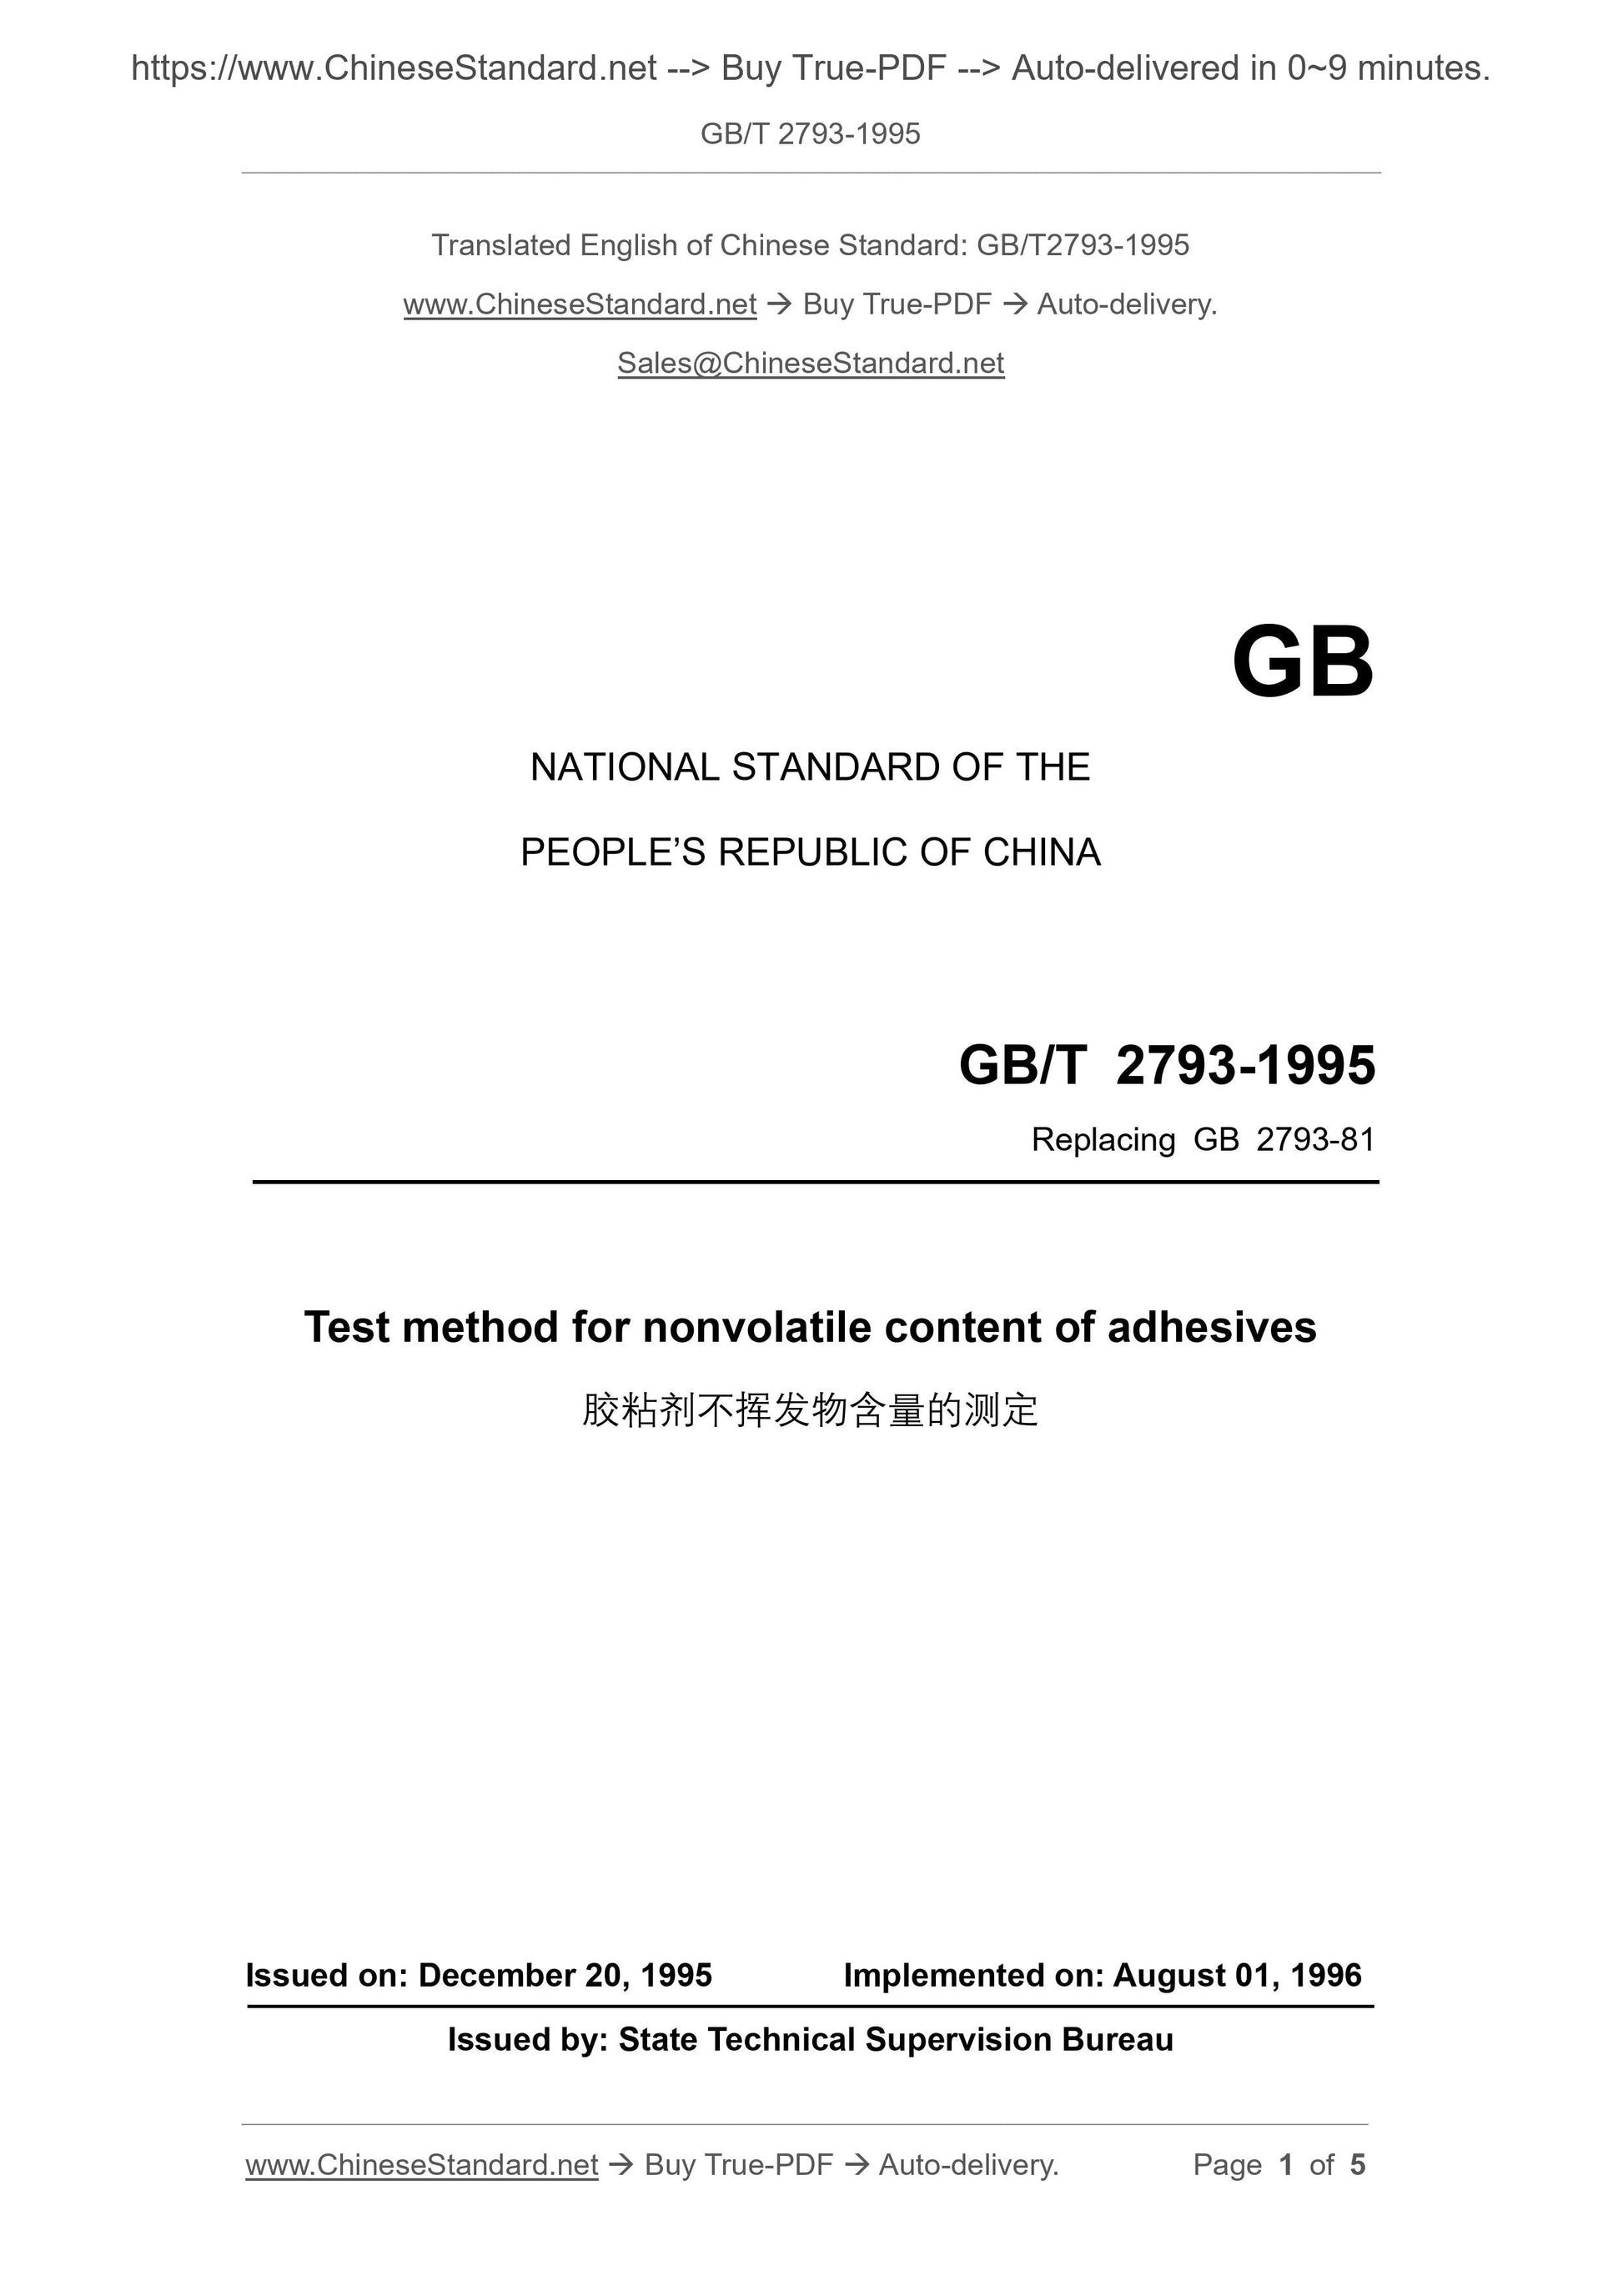 GB/T 2793-1995 Page 1